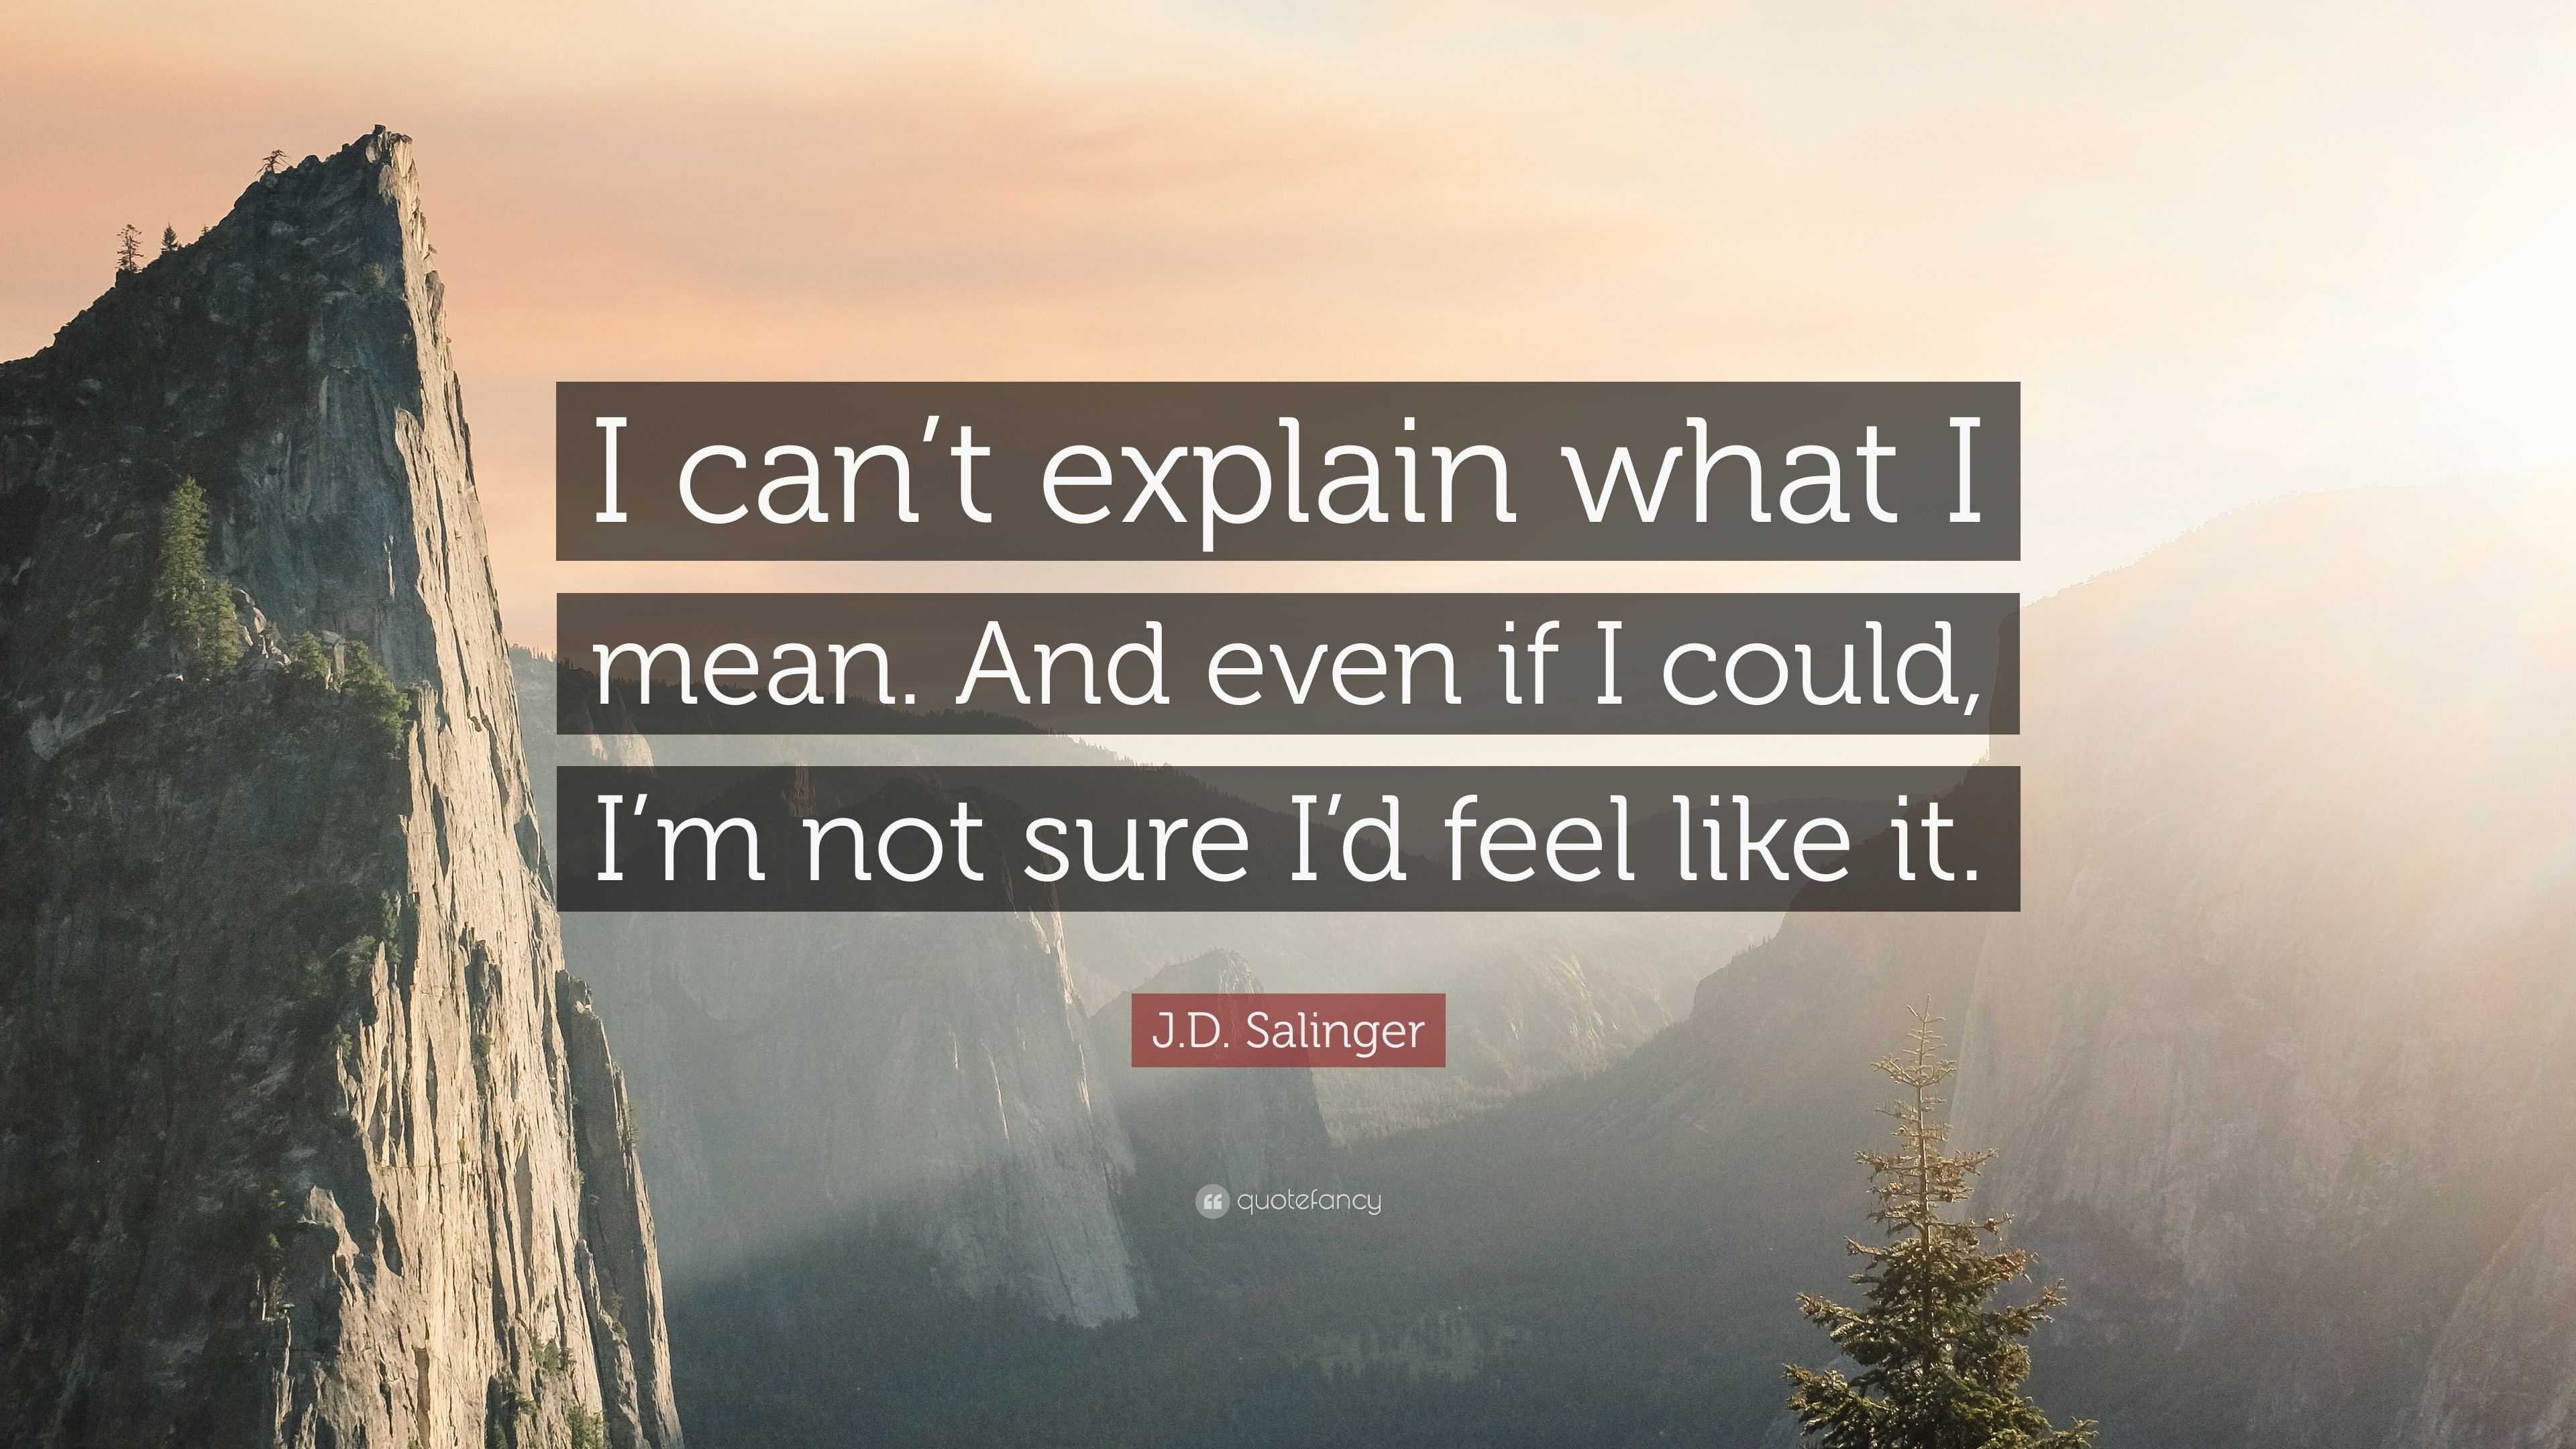 J D Salinger Quote I Can T Explain What I Mean And Even If I Could I M Not Sure I D Feel Like It 12 Wallpapers Quotefancy